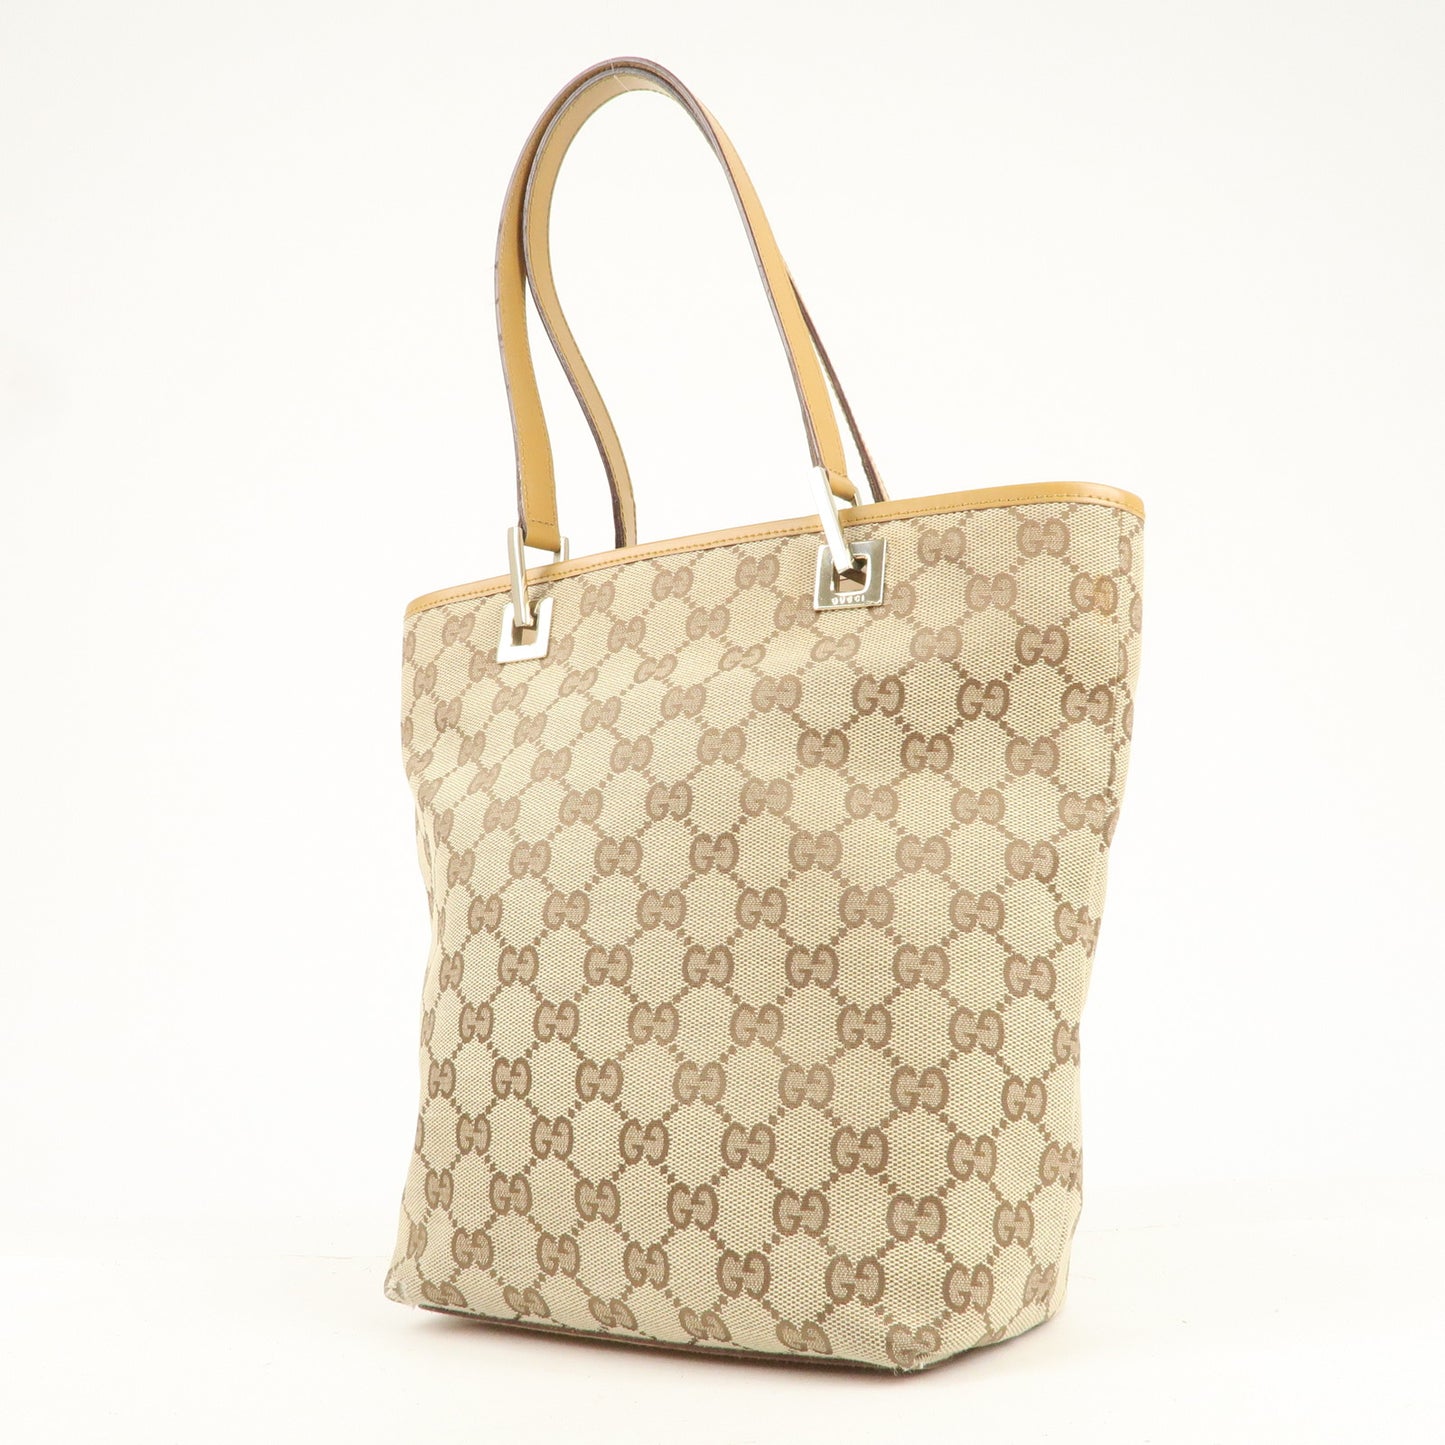 GUCCI GG Canvas Leather Tote Bag Beige Light Brown 002.1099